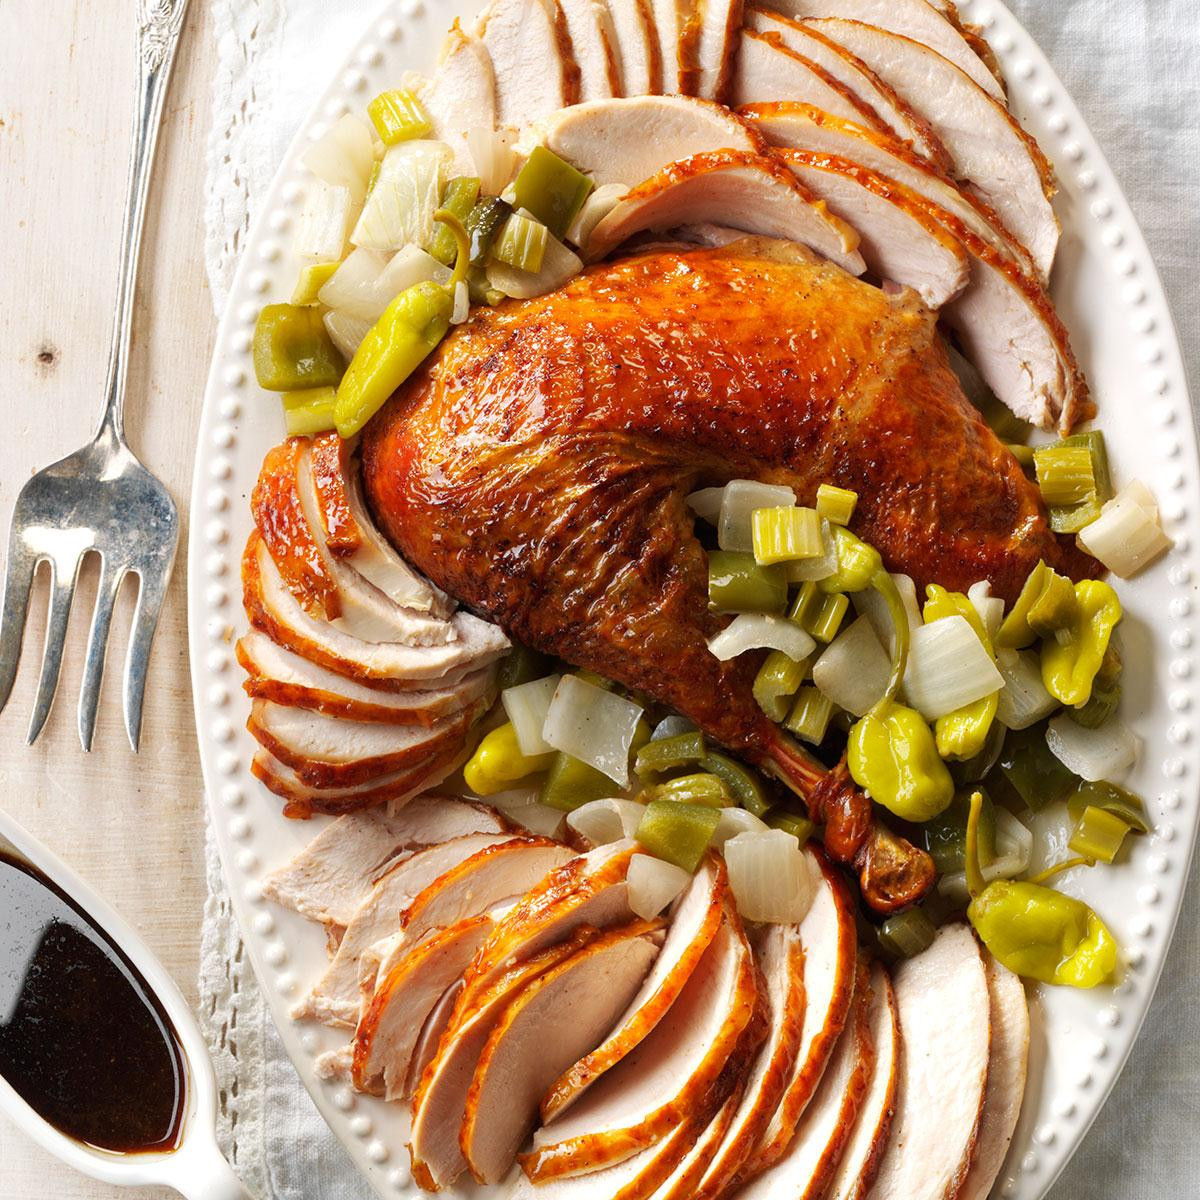 Thanksgiving Dinner Recipes
 40 Thanksgiving Dinner Recipes to Feed a Crowd